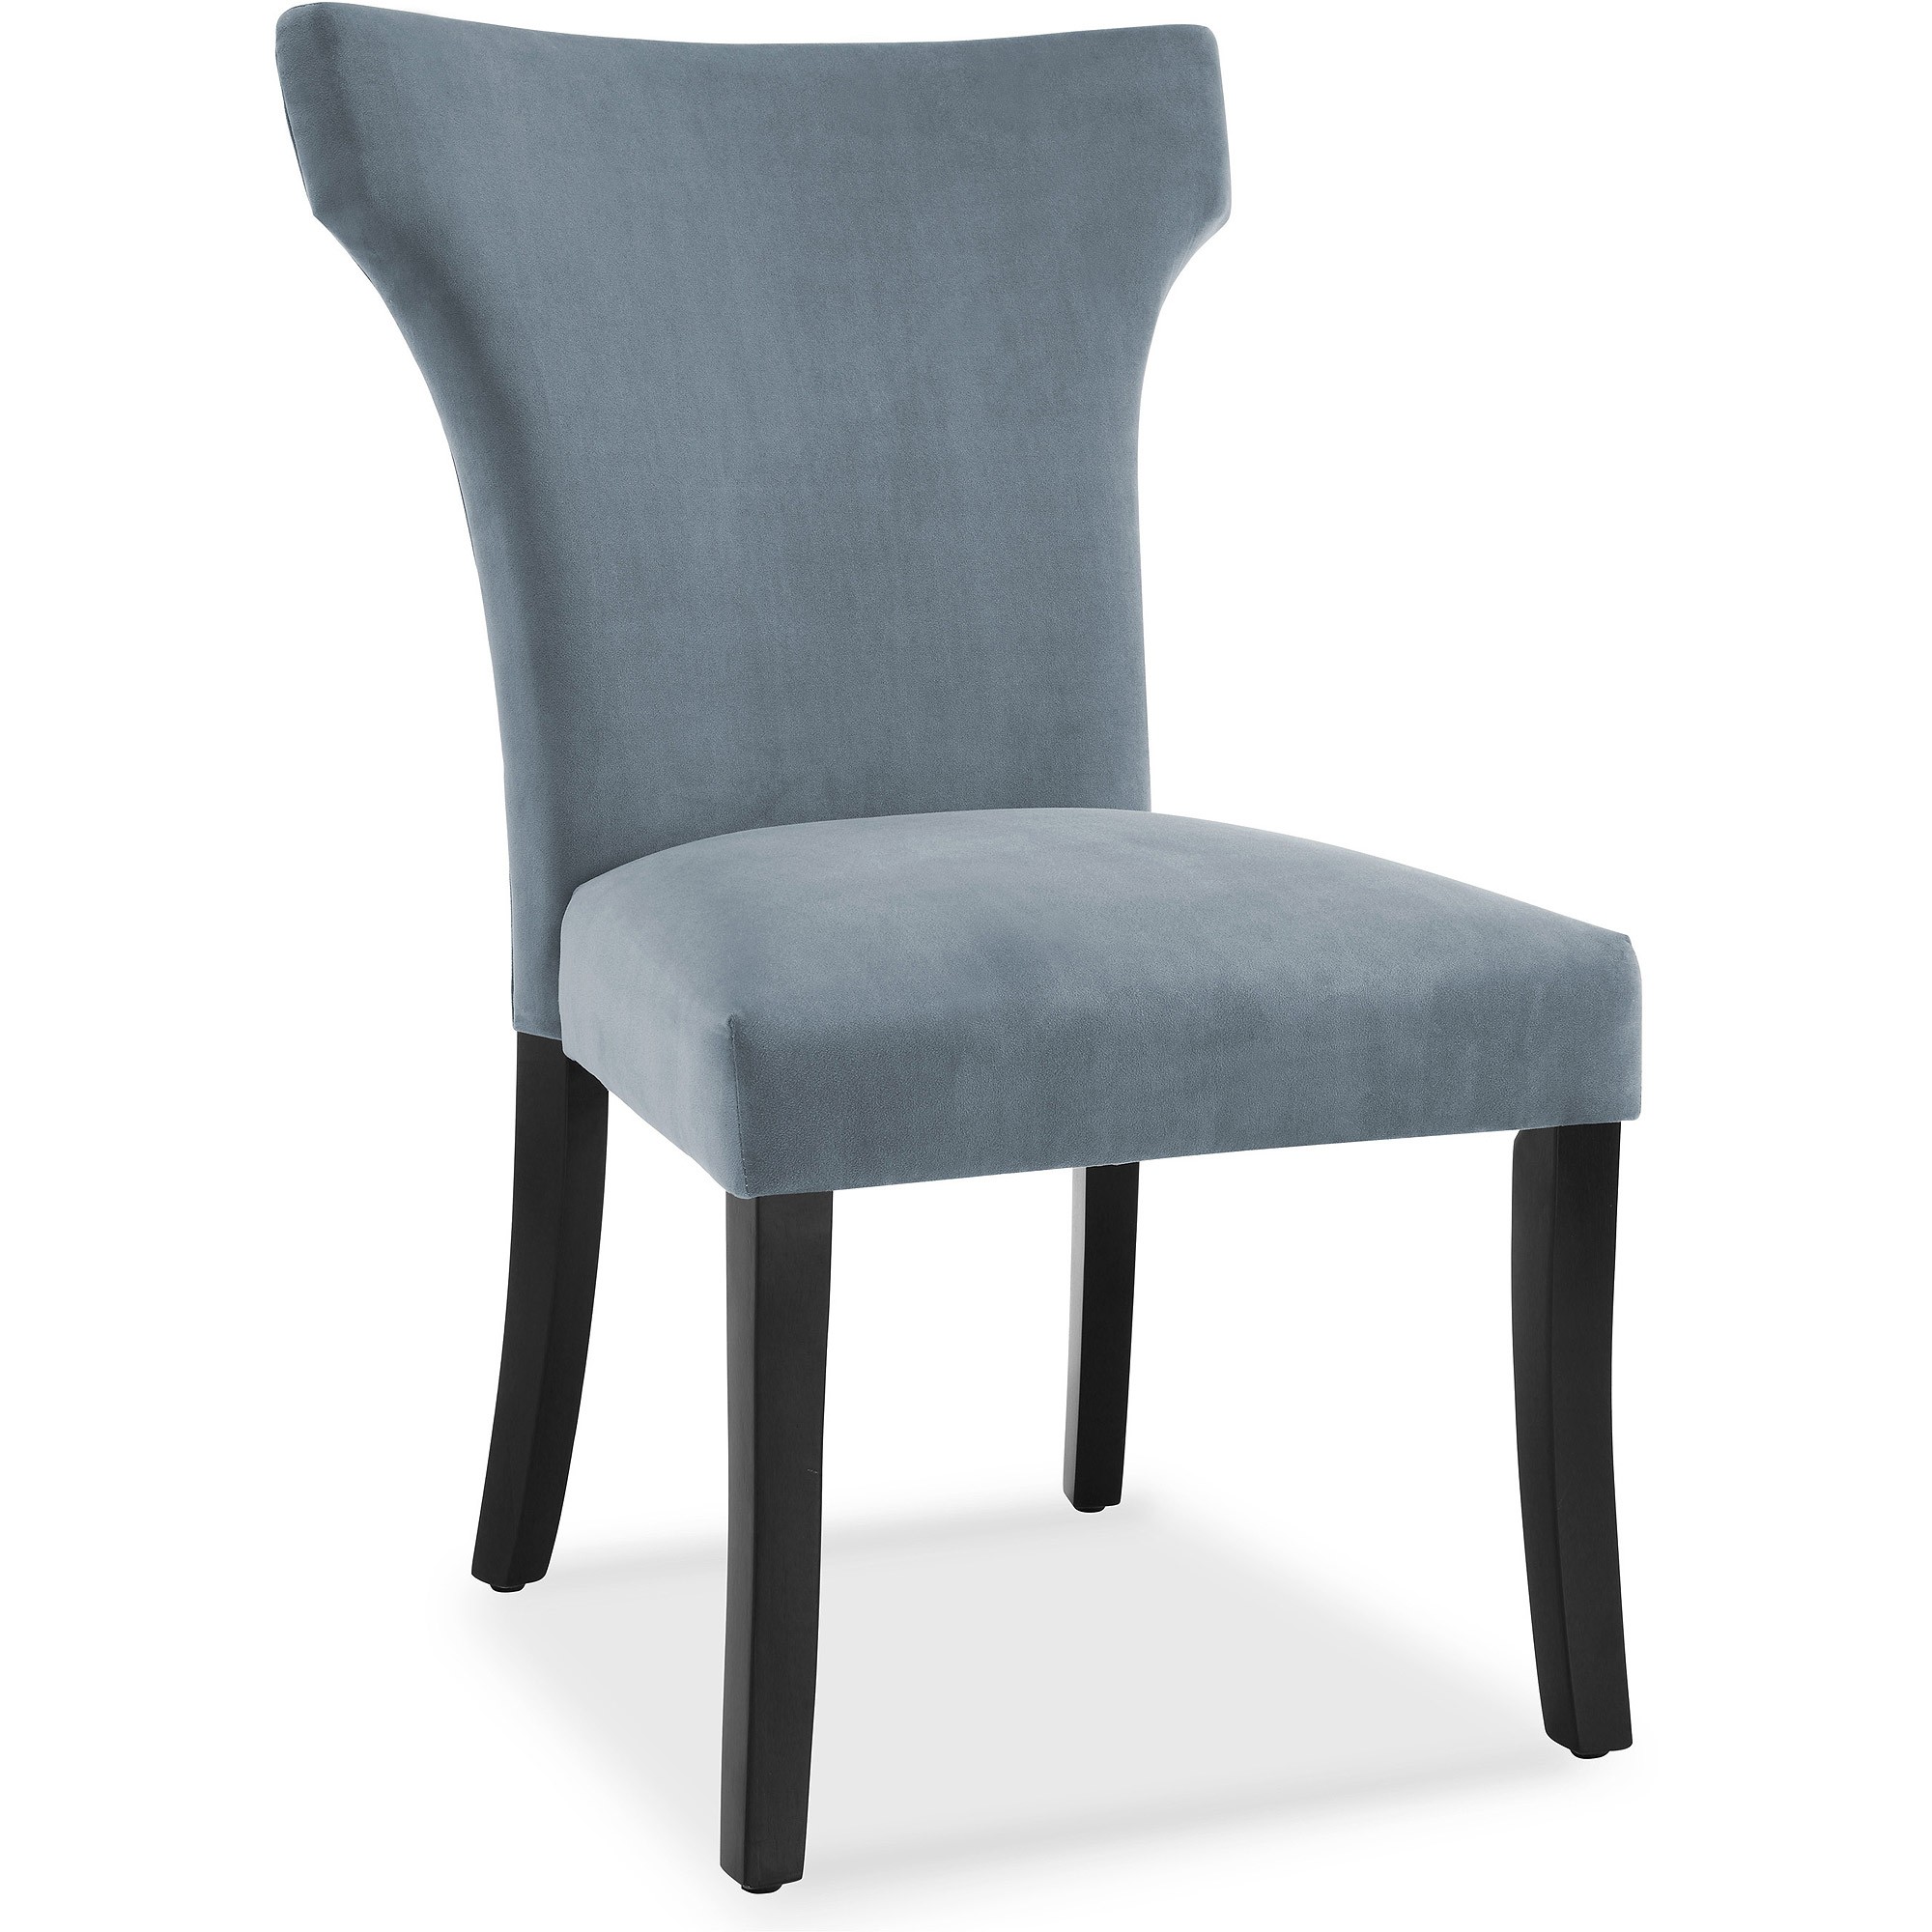 Dhi florence upholstered wing back dining chair multiple colors 3